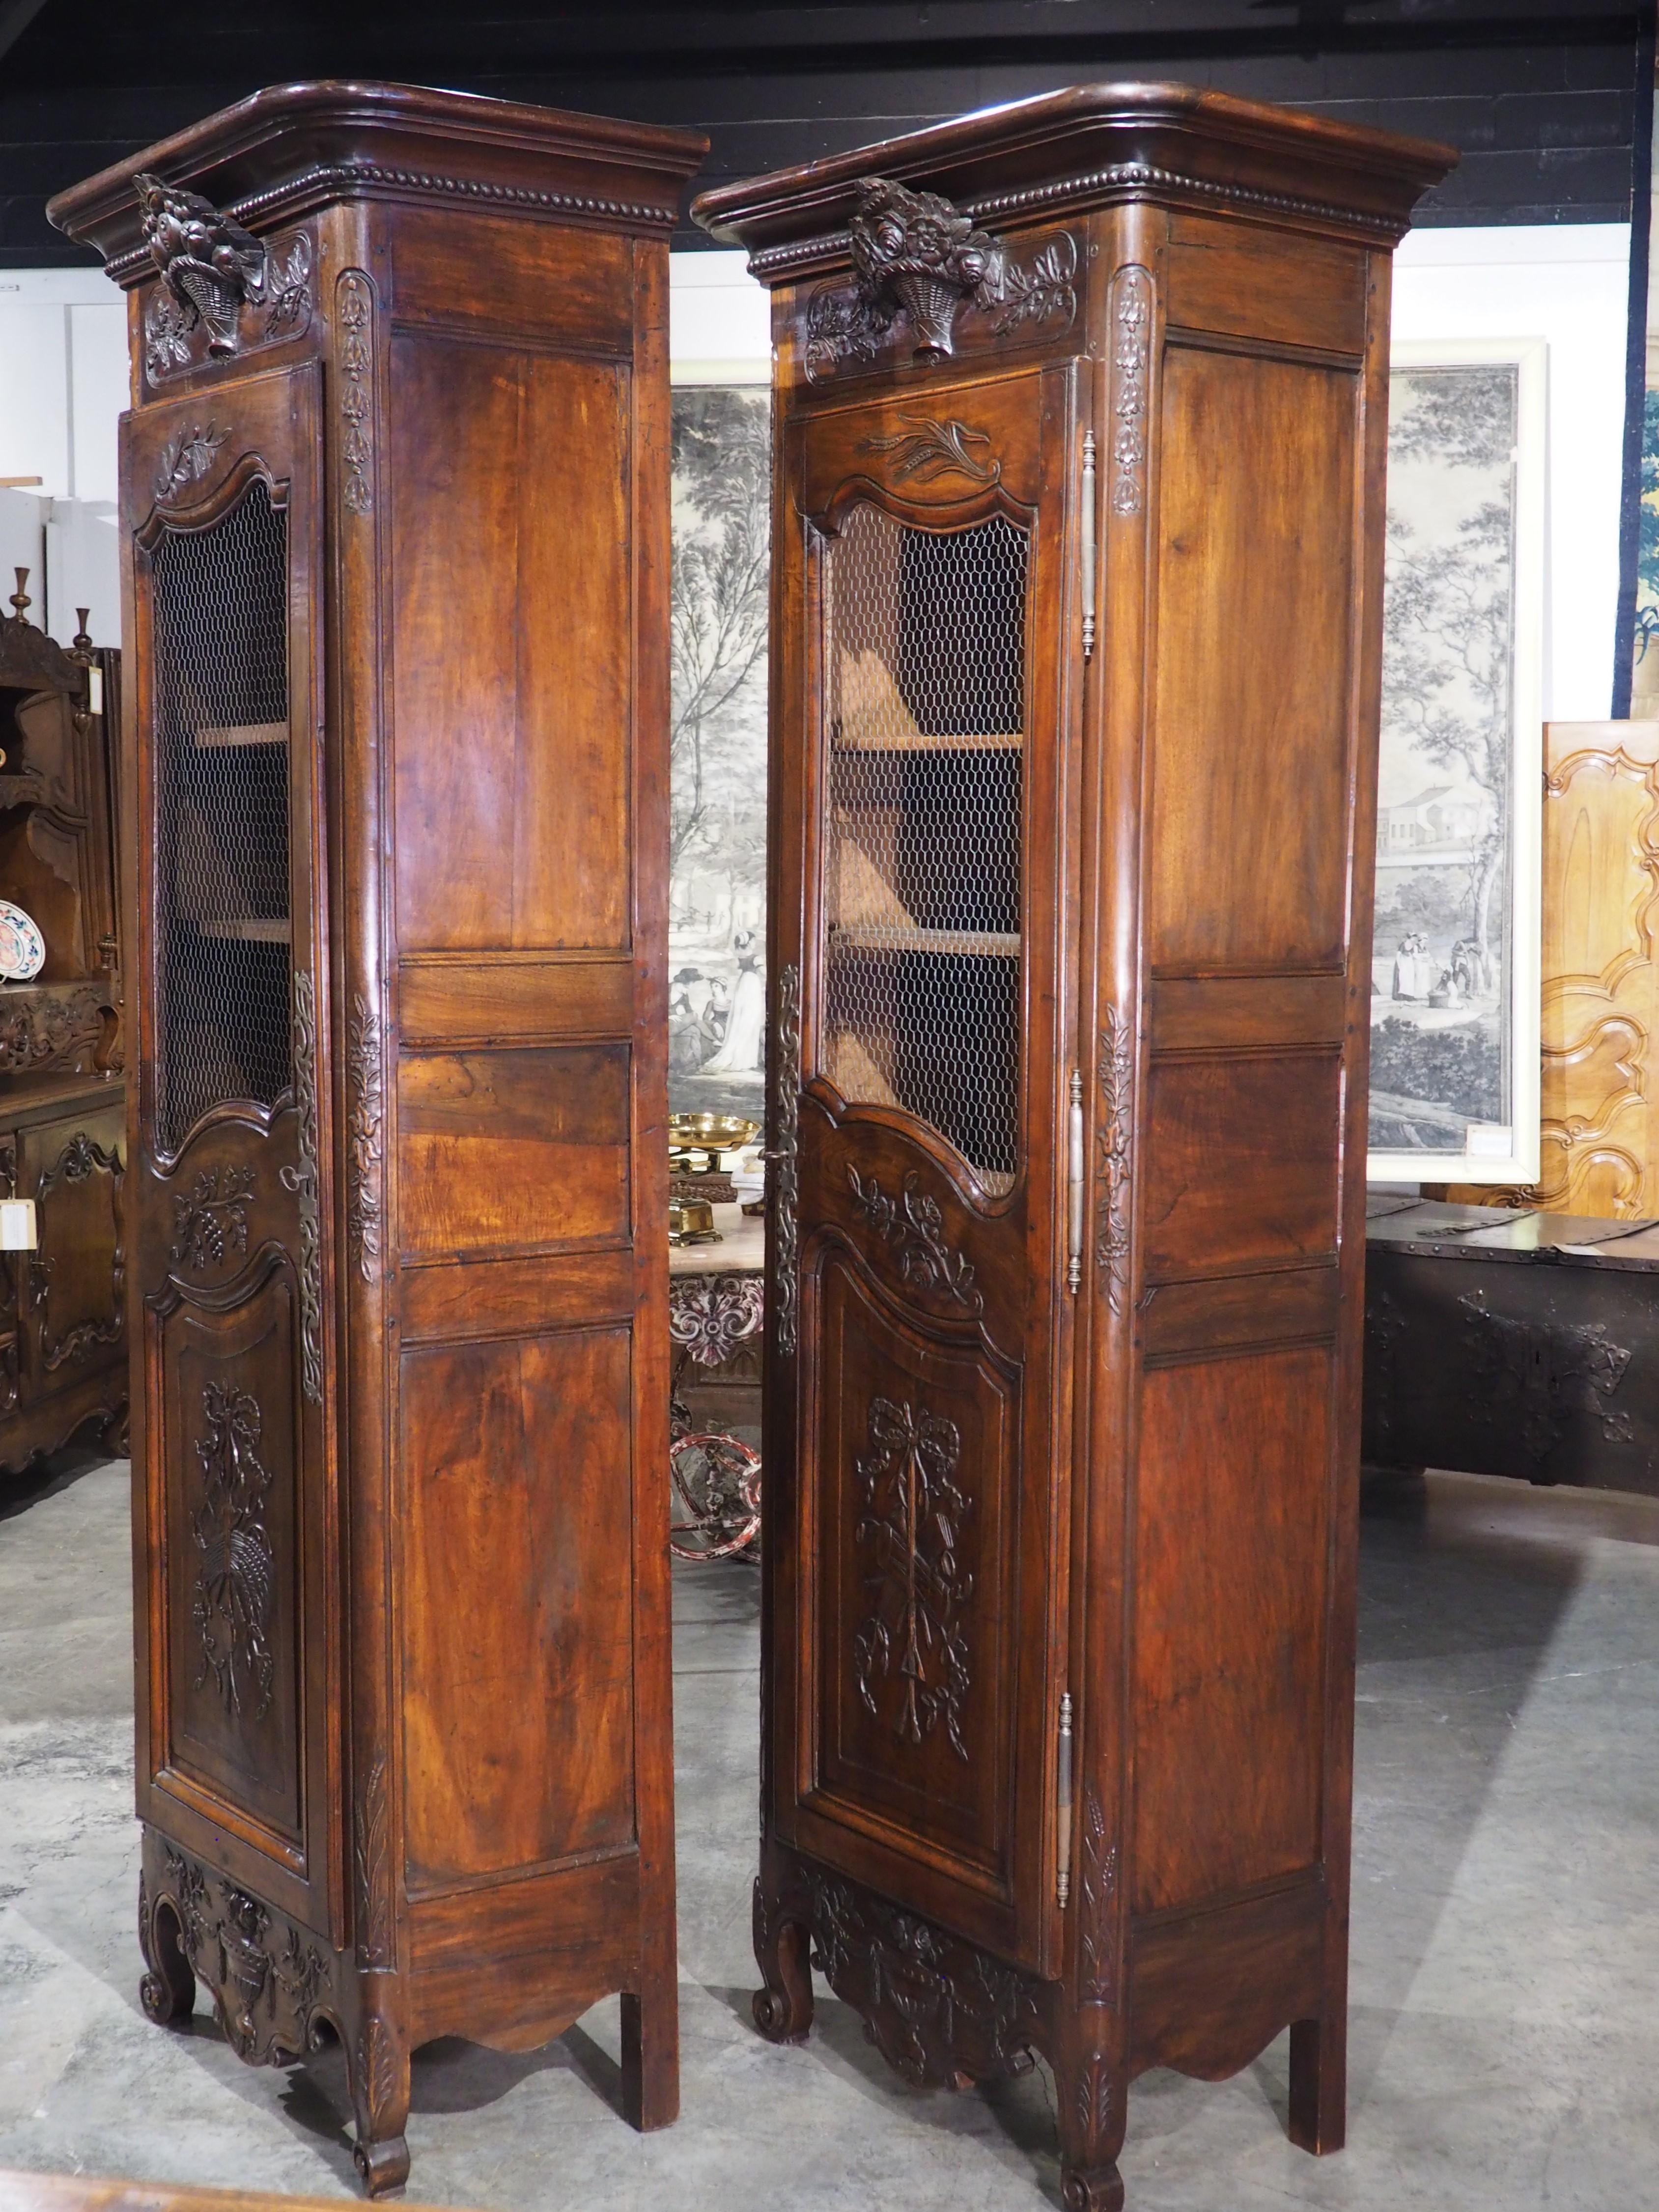 Rare Pair of 19th Century Walnut Wood Bonnetieres from Provence, France 8